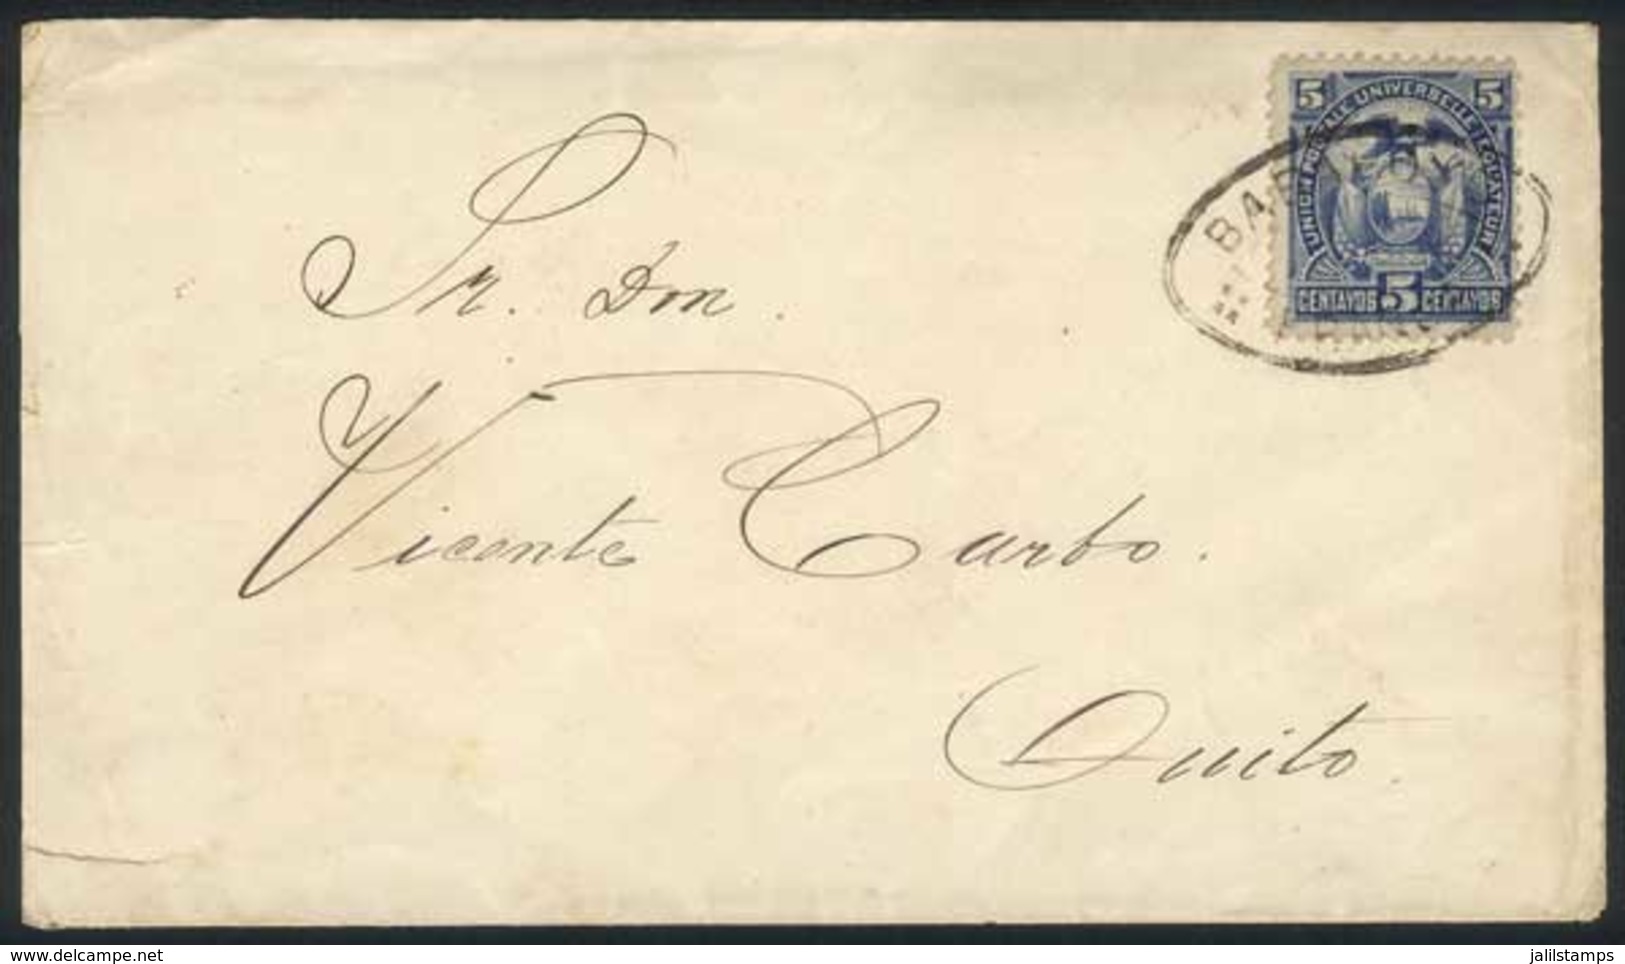 683 ECUADOR: Cover Franked With 5c. (Sc.21) Sent To Quito, With Interesting Oval Cancel - Equateur